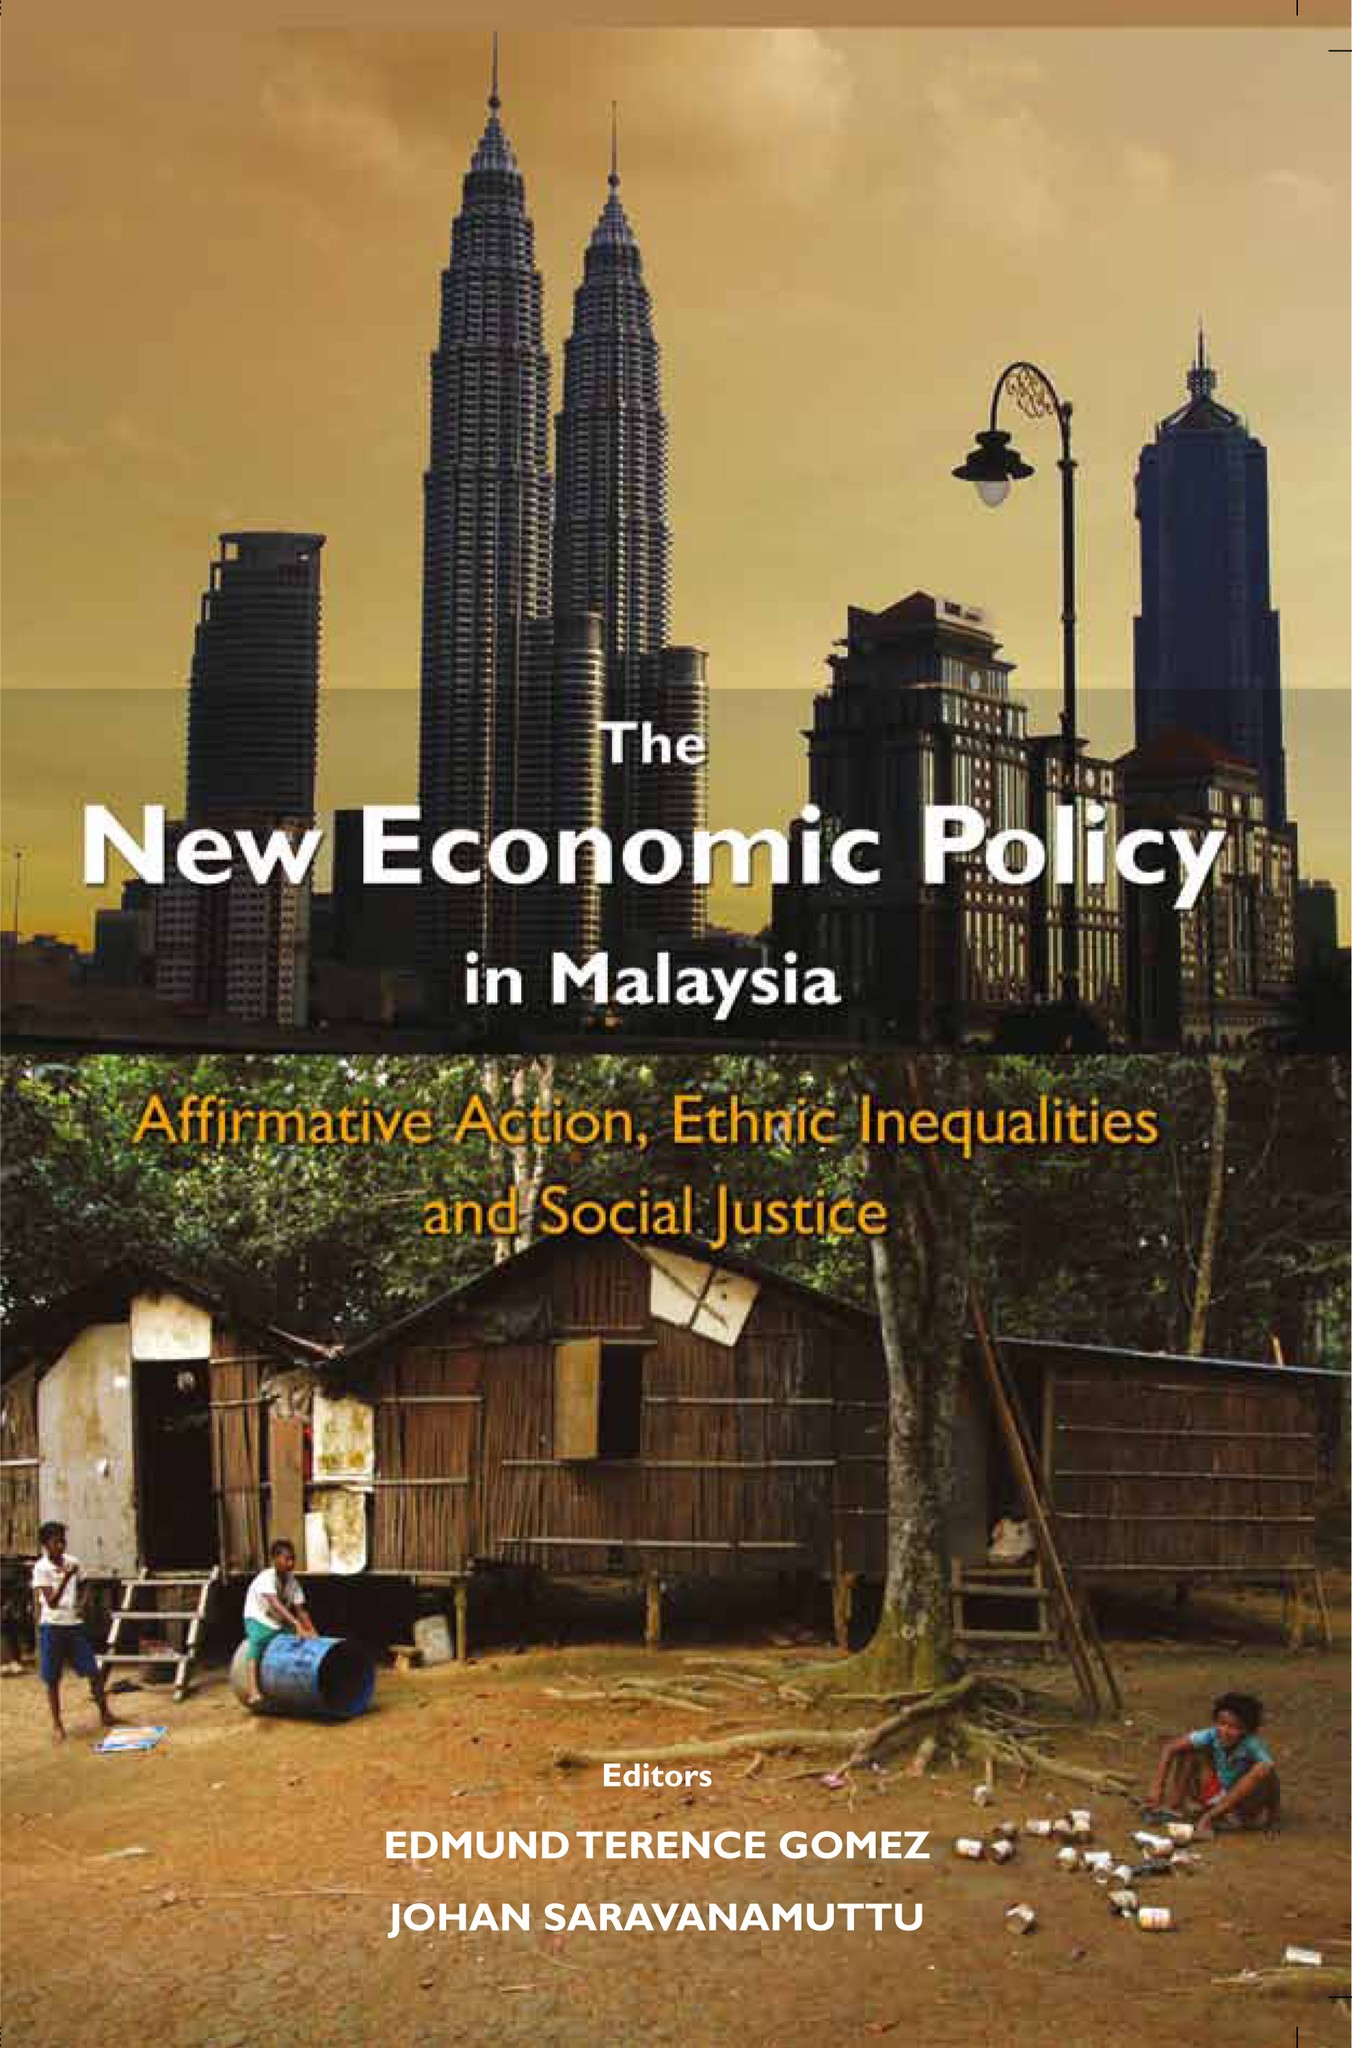 The New Economic Policy in Malaysia: Affirmative Action, Ethnic Inequalities and Social Justice